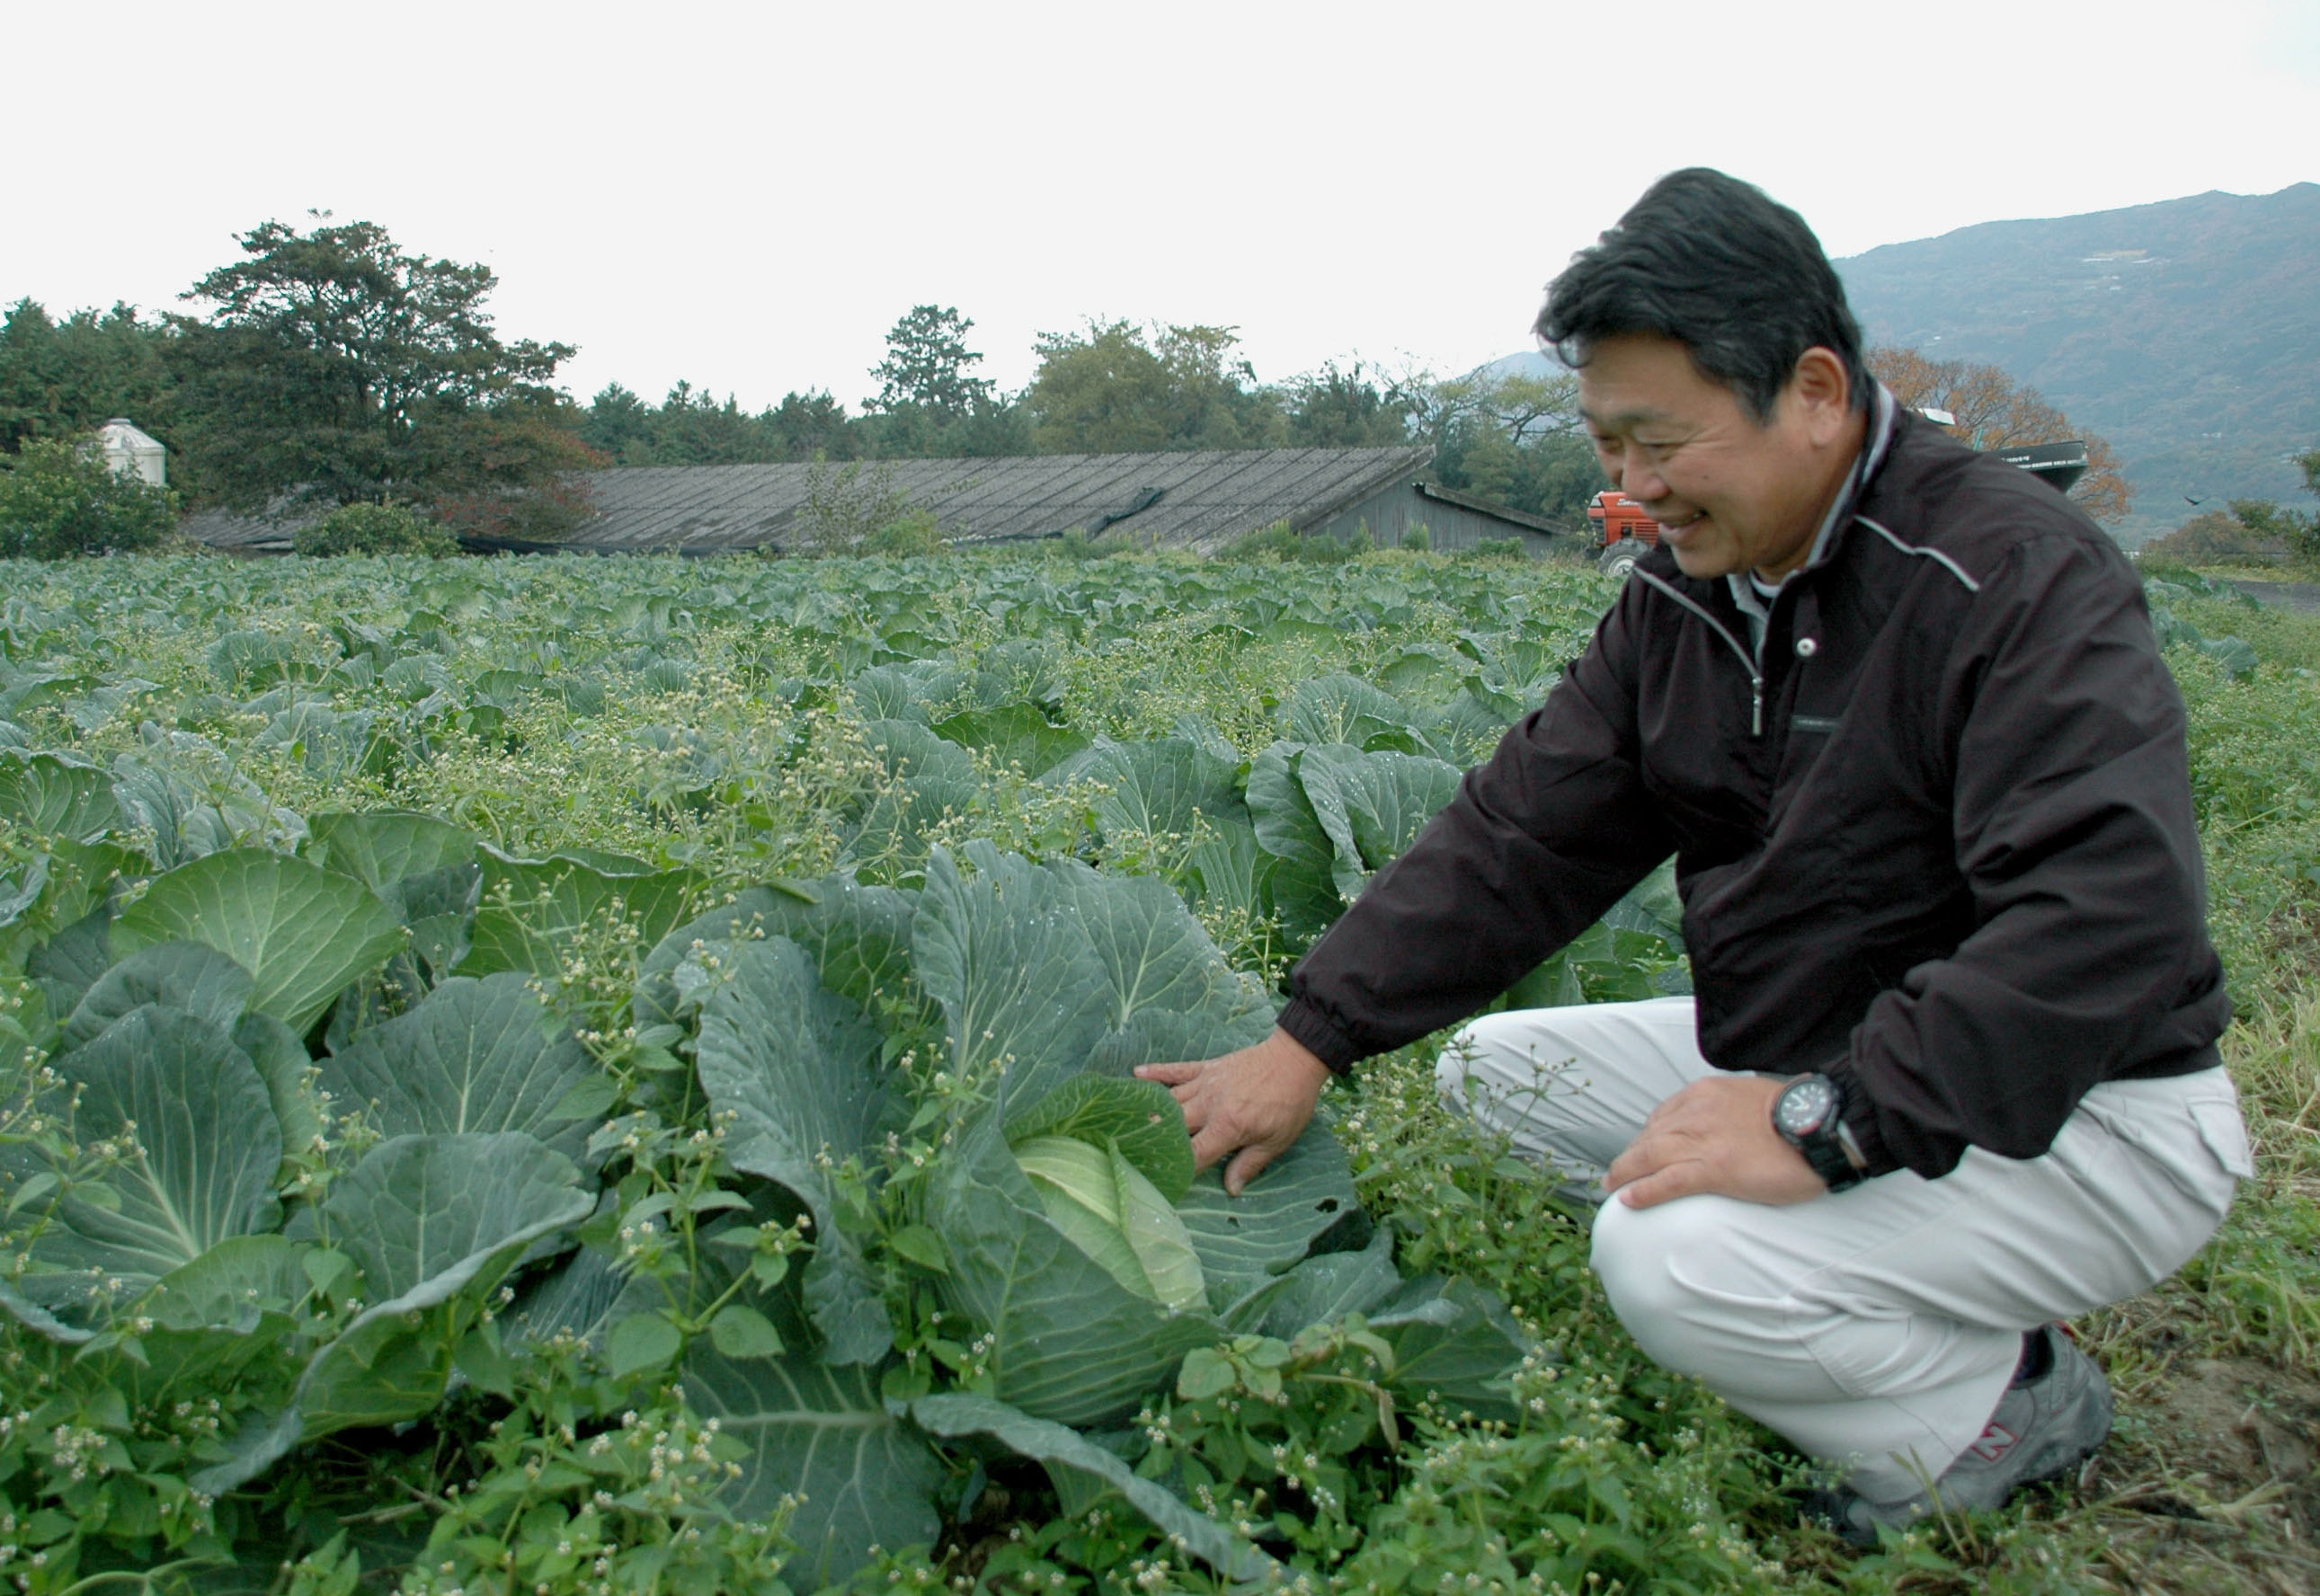 Country boy: A man in a Tokushima Prefecture village checks some crops. A recent TV show called 'Napoleon's Village' focused on depopulation in Japan's rural areas. | KYODO